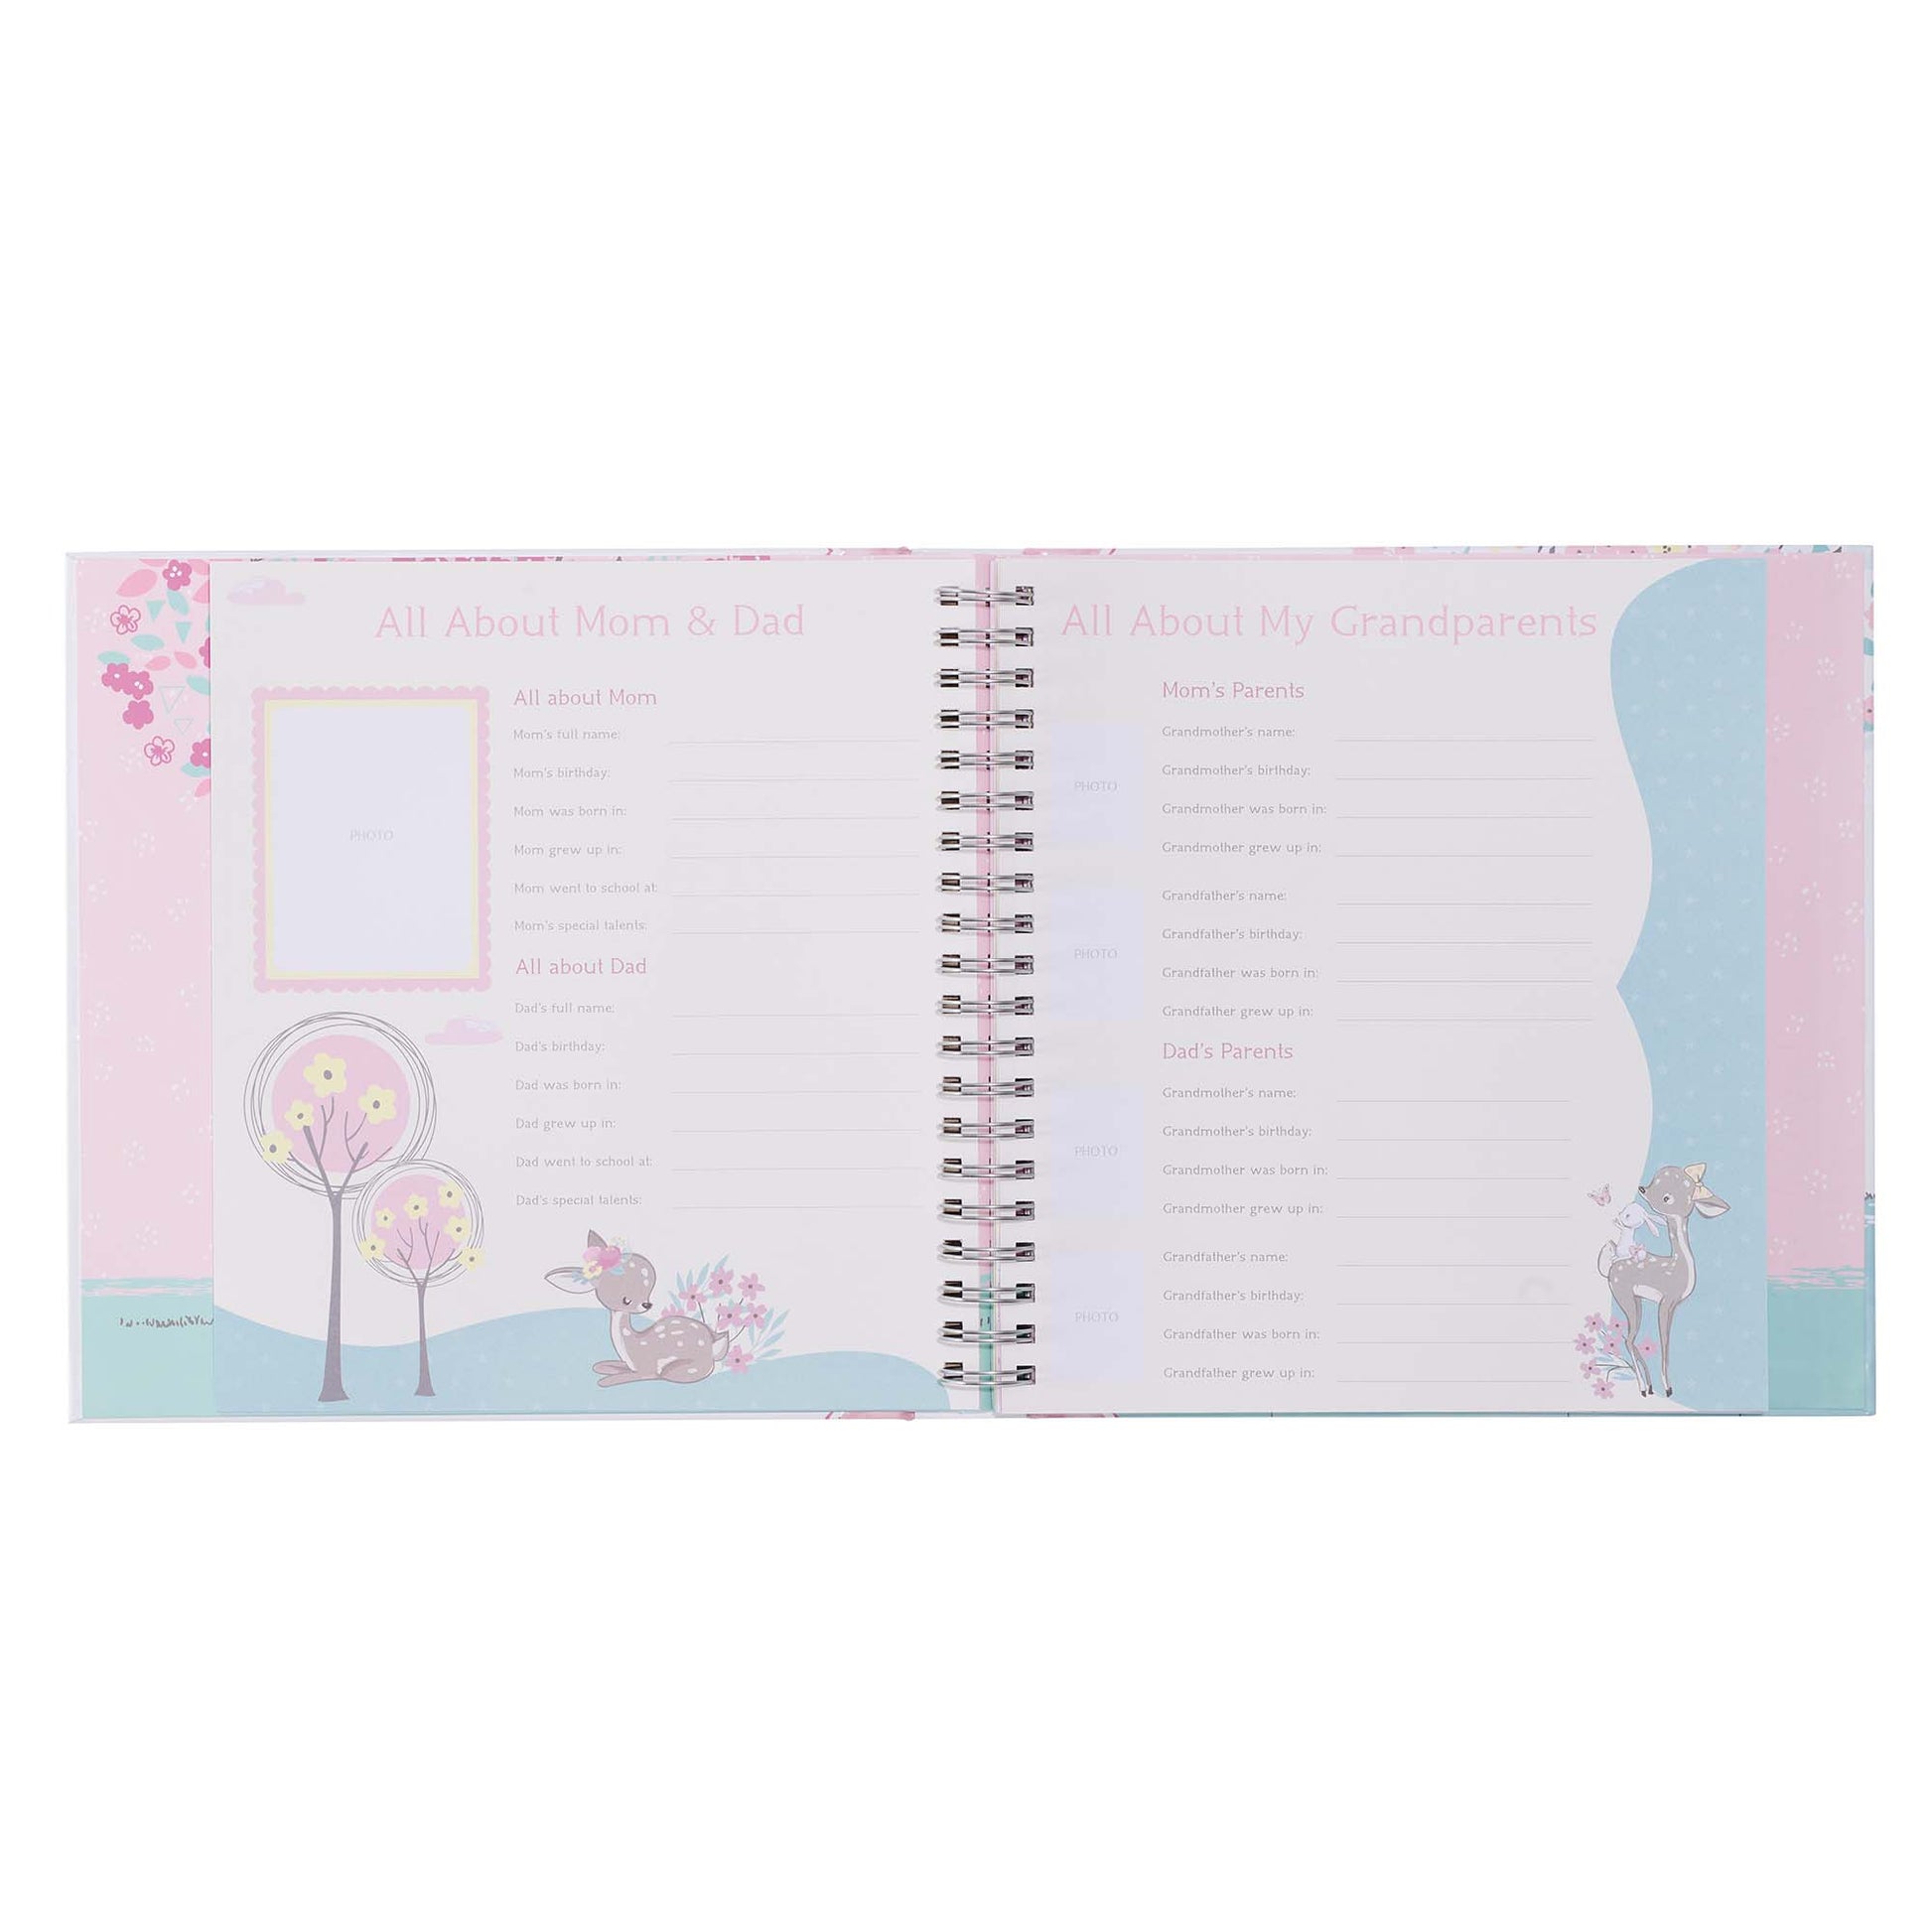 Our Baby Girl's First Year Memory Book - The Christian Gift Company